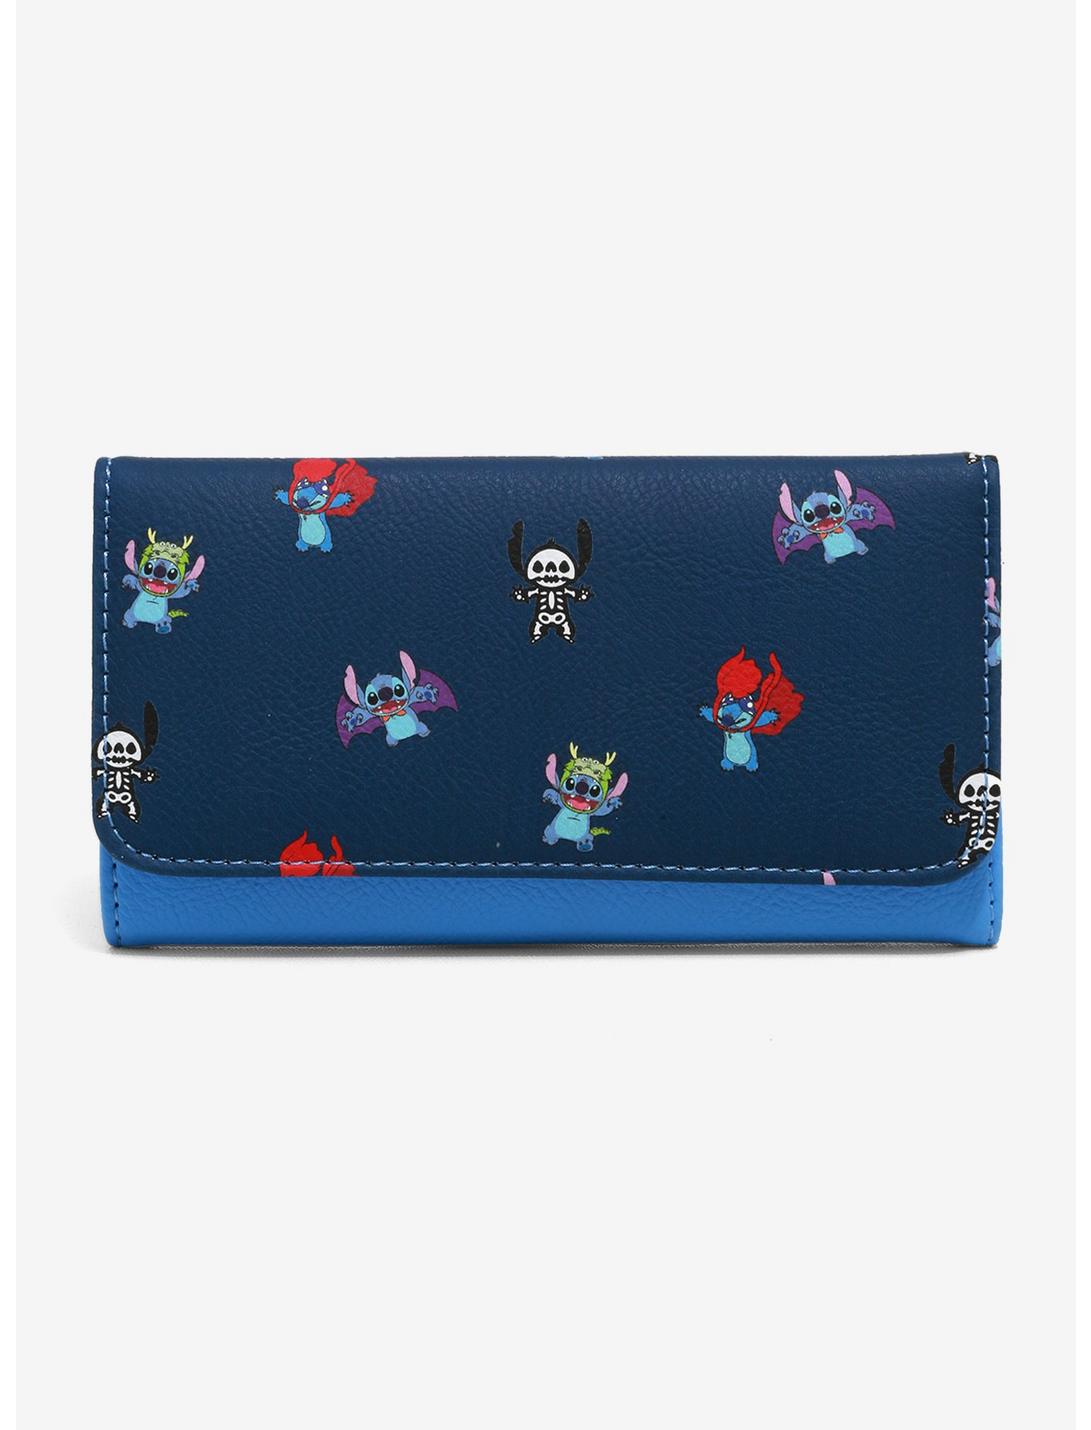 Loungefly Disney Lilo & Stitch Costumes Flap Wallet, , hi-res